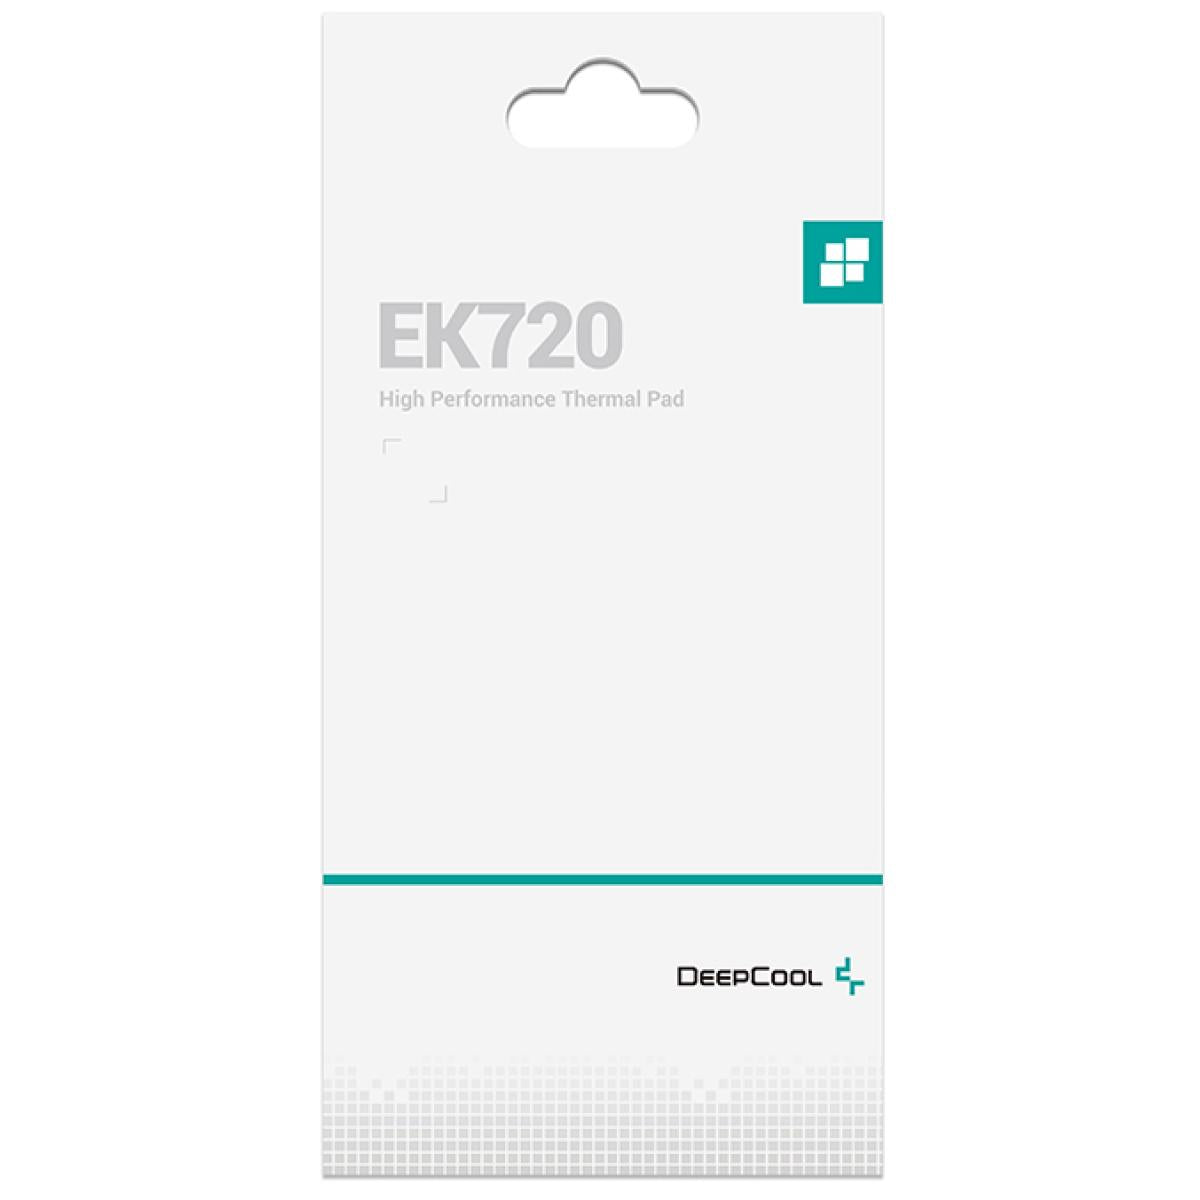 DeepCool EK720 High Performance Thermal Pad 1.5mm For Laptops, Graphics Cards & Game Consoles - L